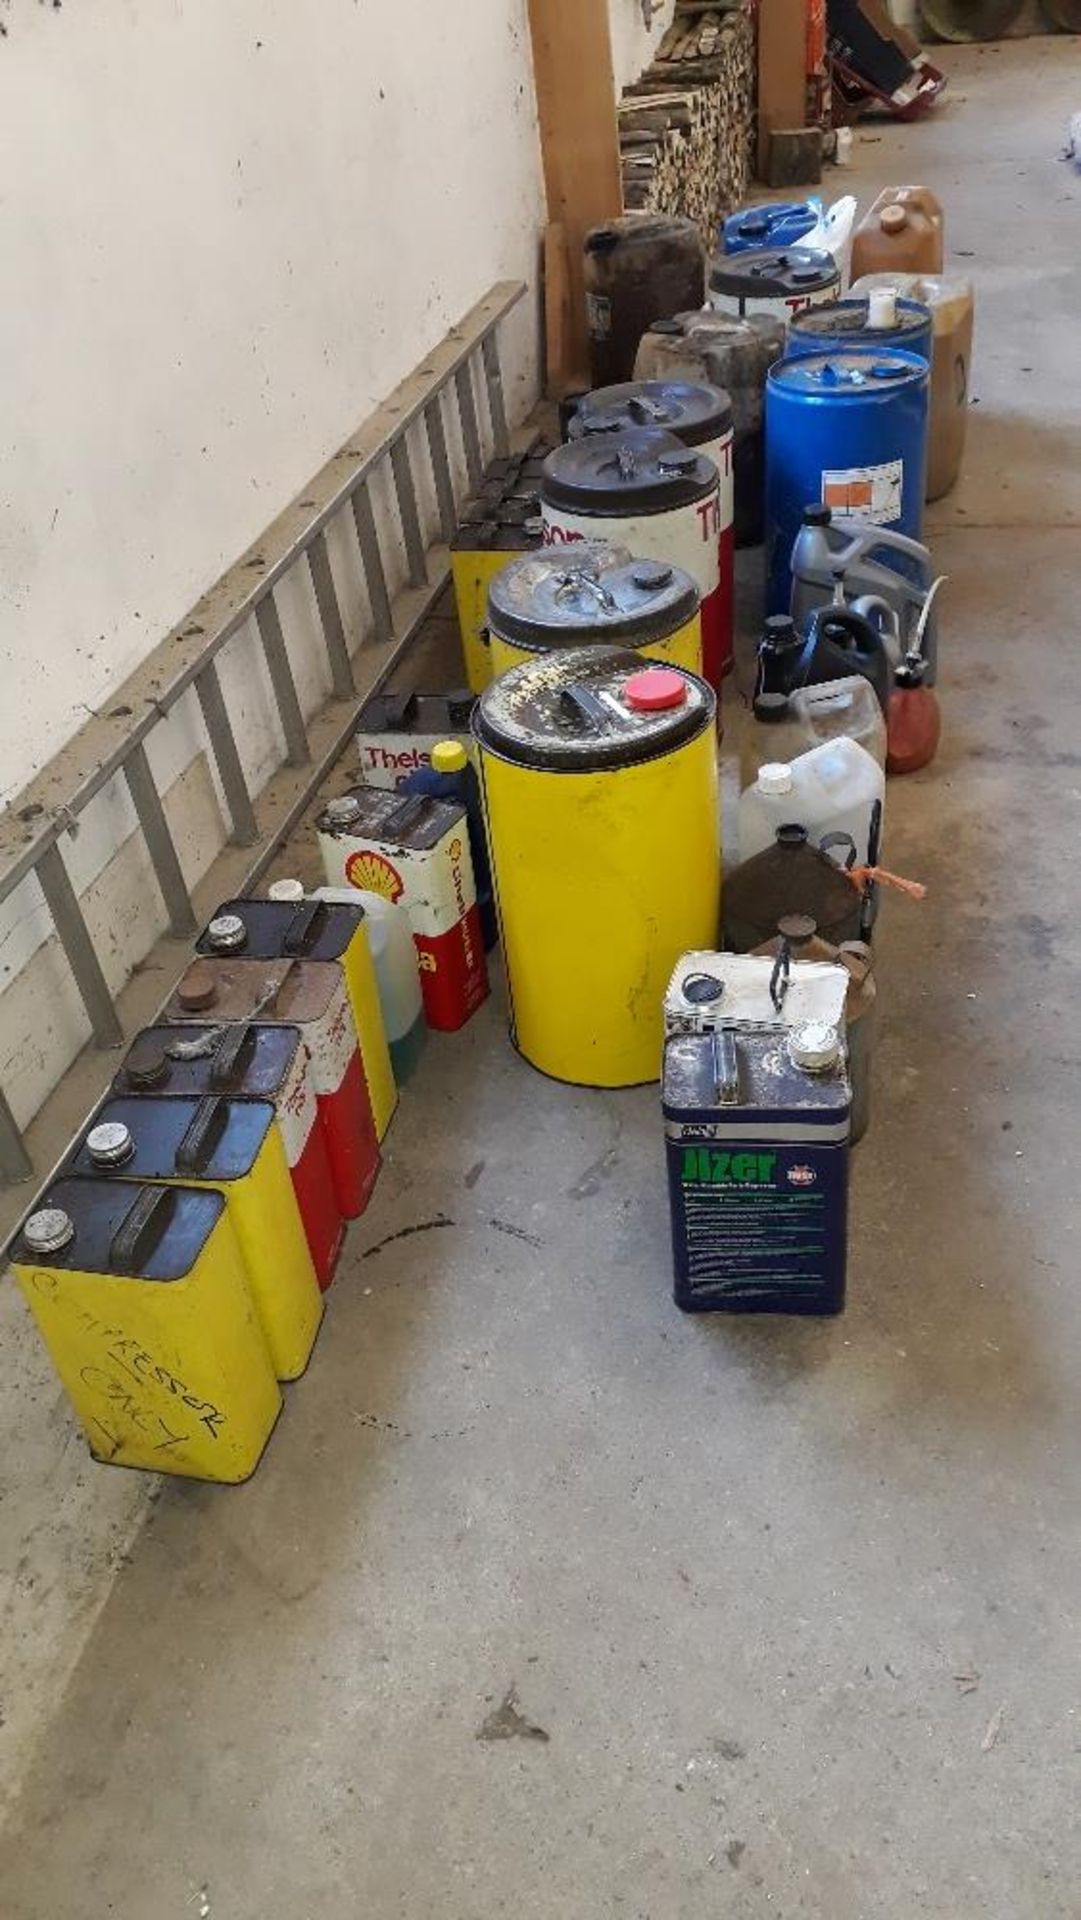 13 rectangular canisters of oil, 9 x large tubs of oil and 1 x diesel.